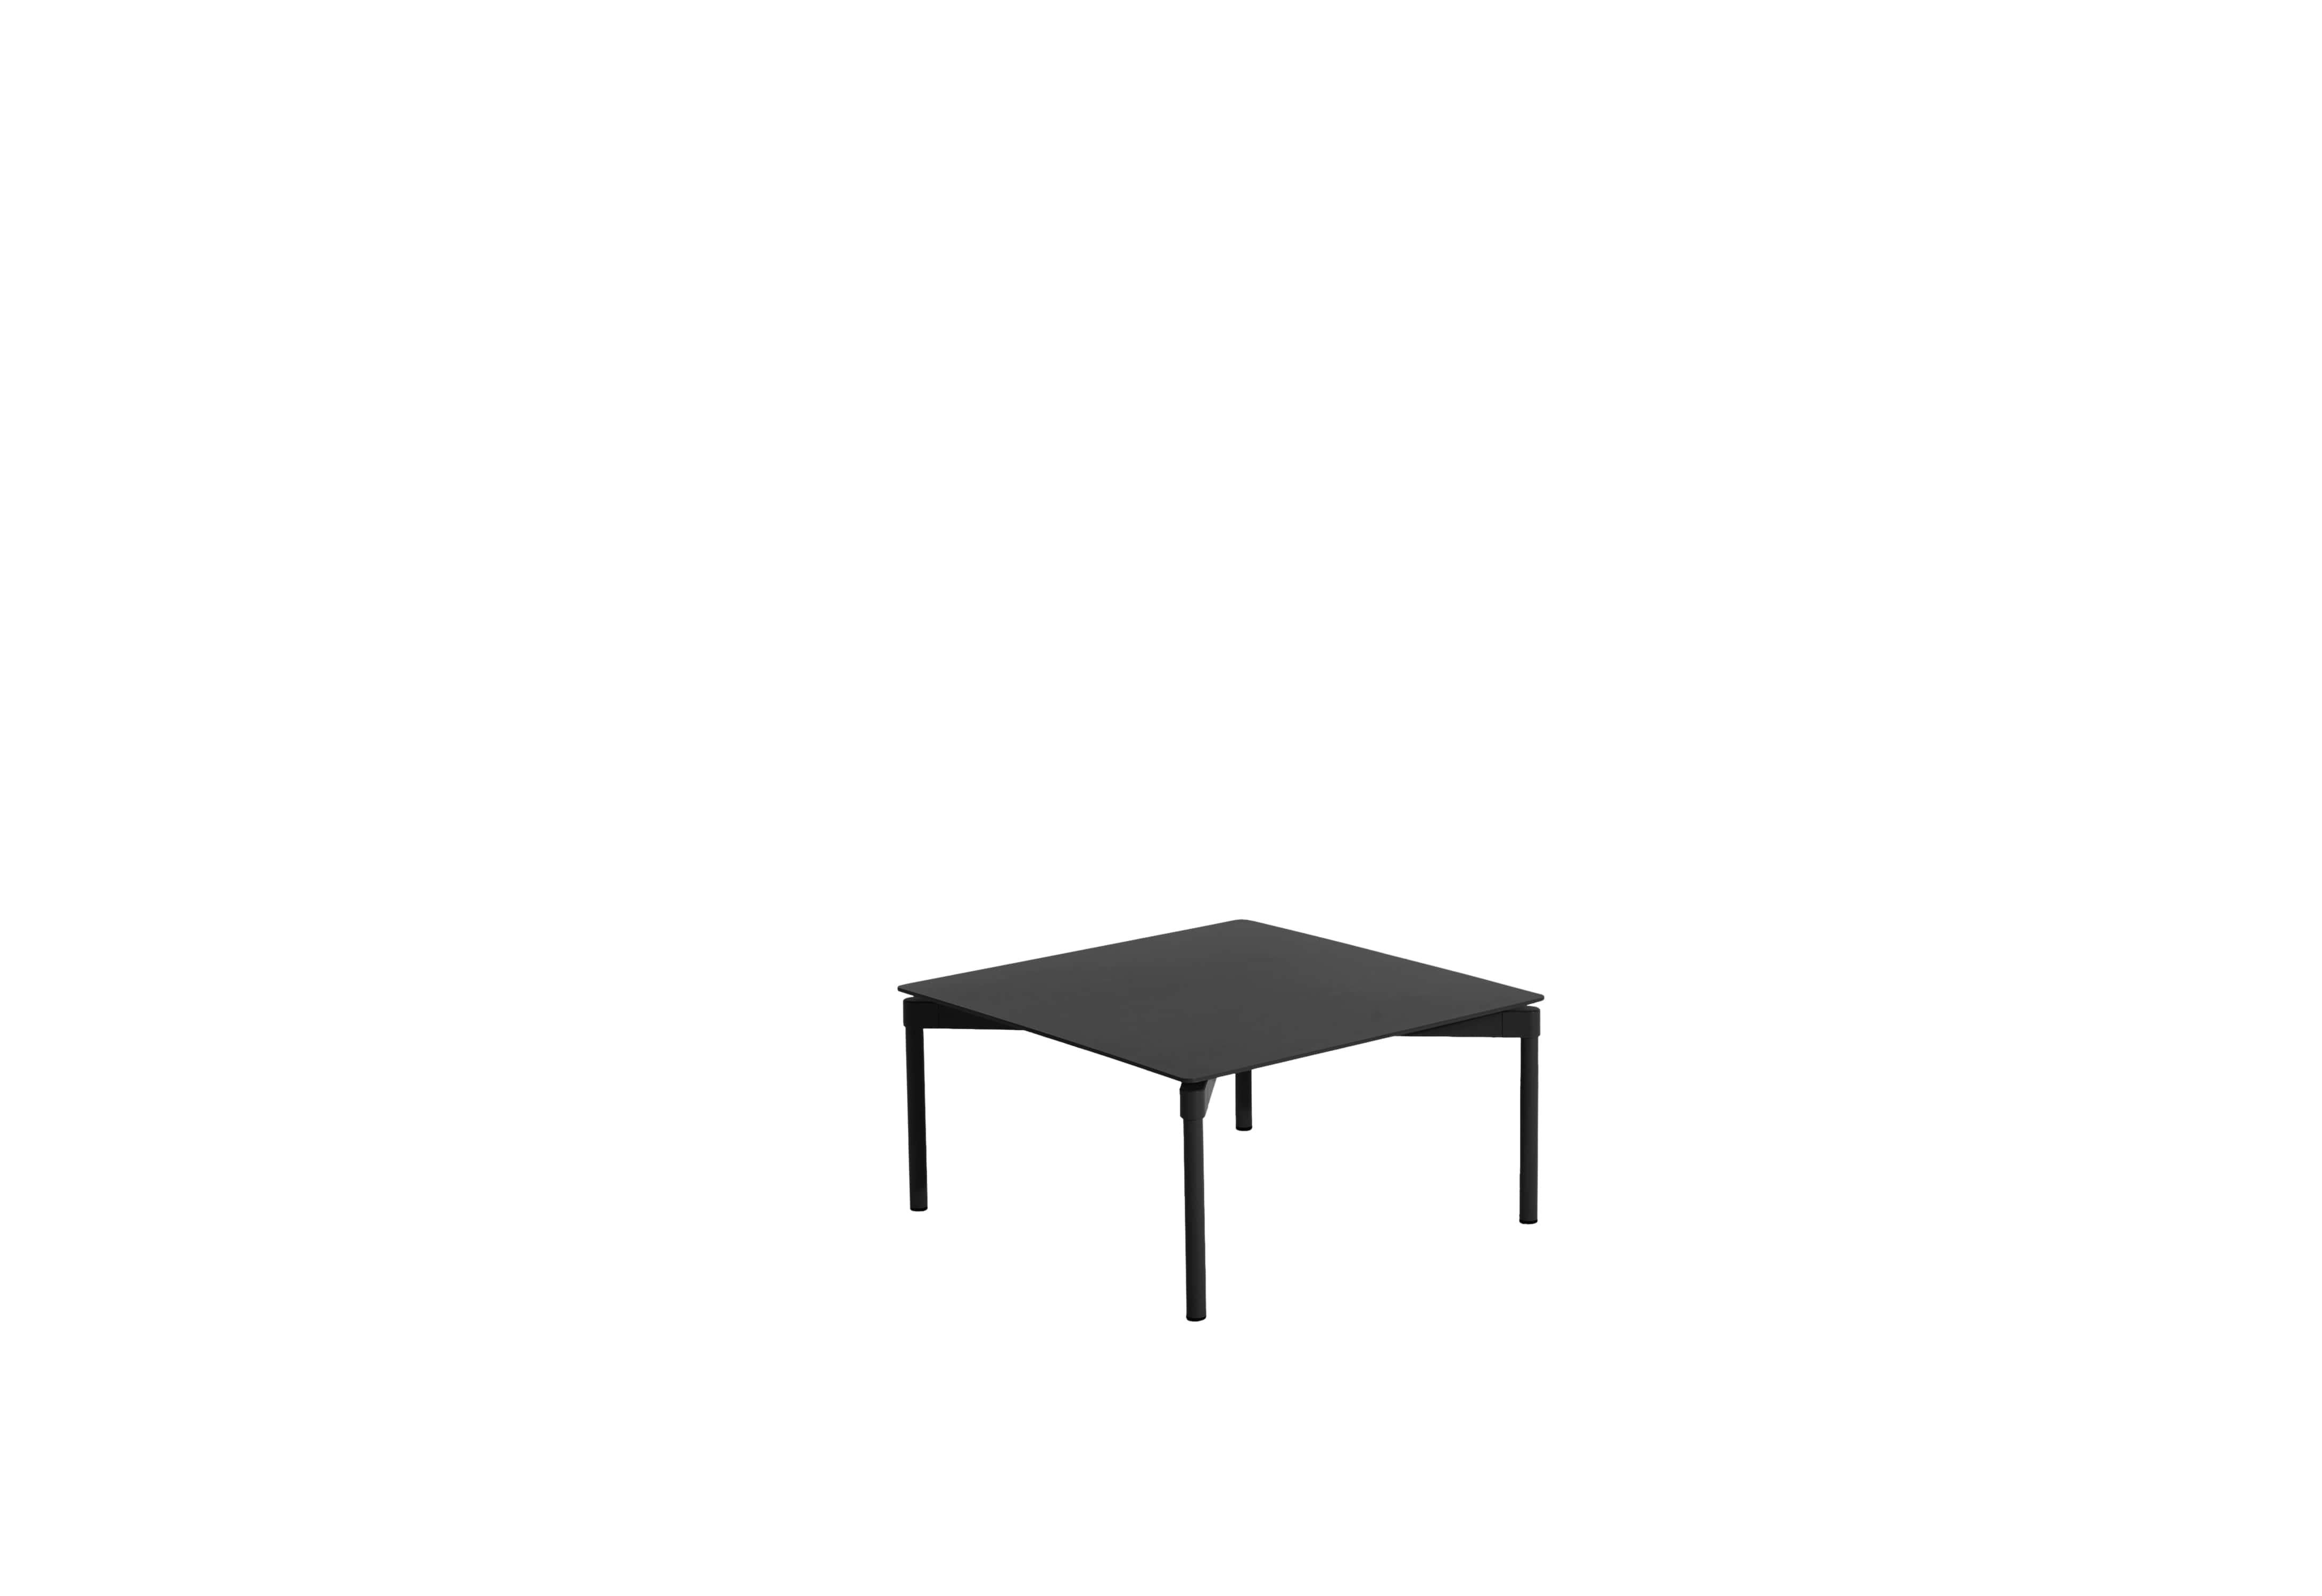 Petite Friture Fromme Coffee Table in Black Aluminium by Tom Chung, 2020

The Fromme collection stands out by its pure line and compact design. Absorbers placed under the seating gives a soft and very comfortable flexibility to seats. Made from